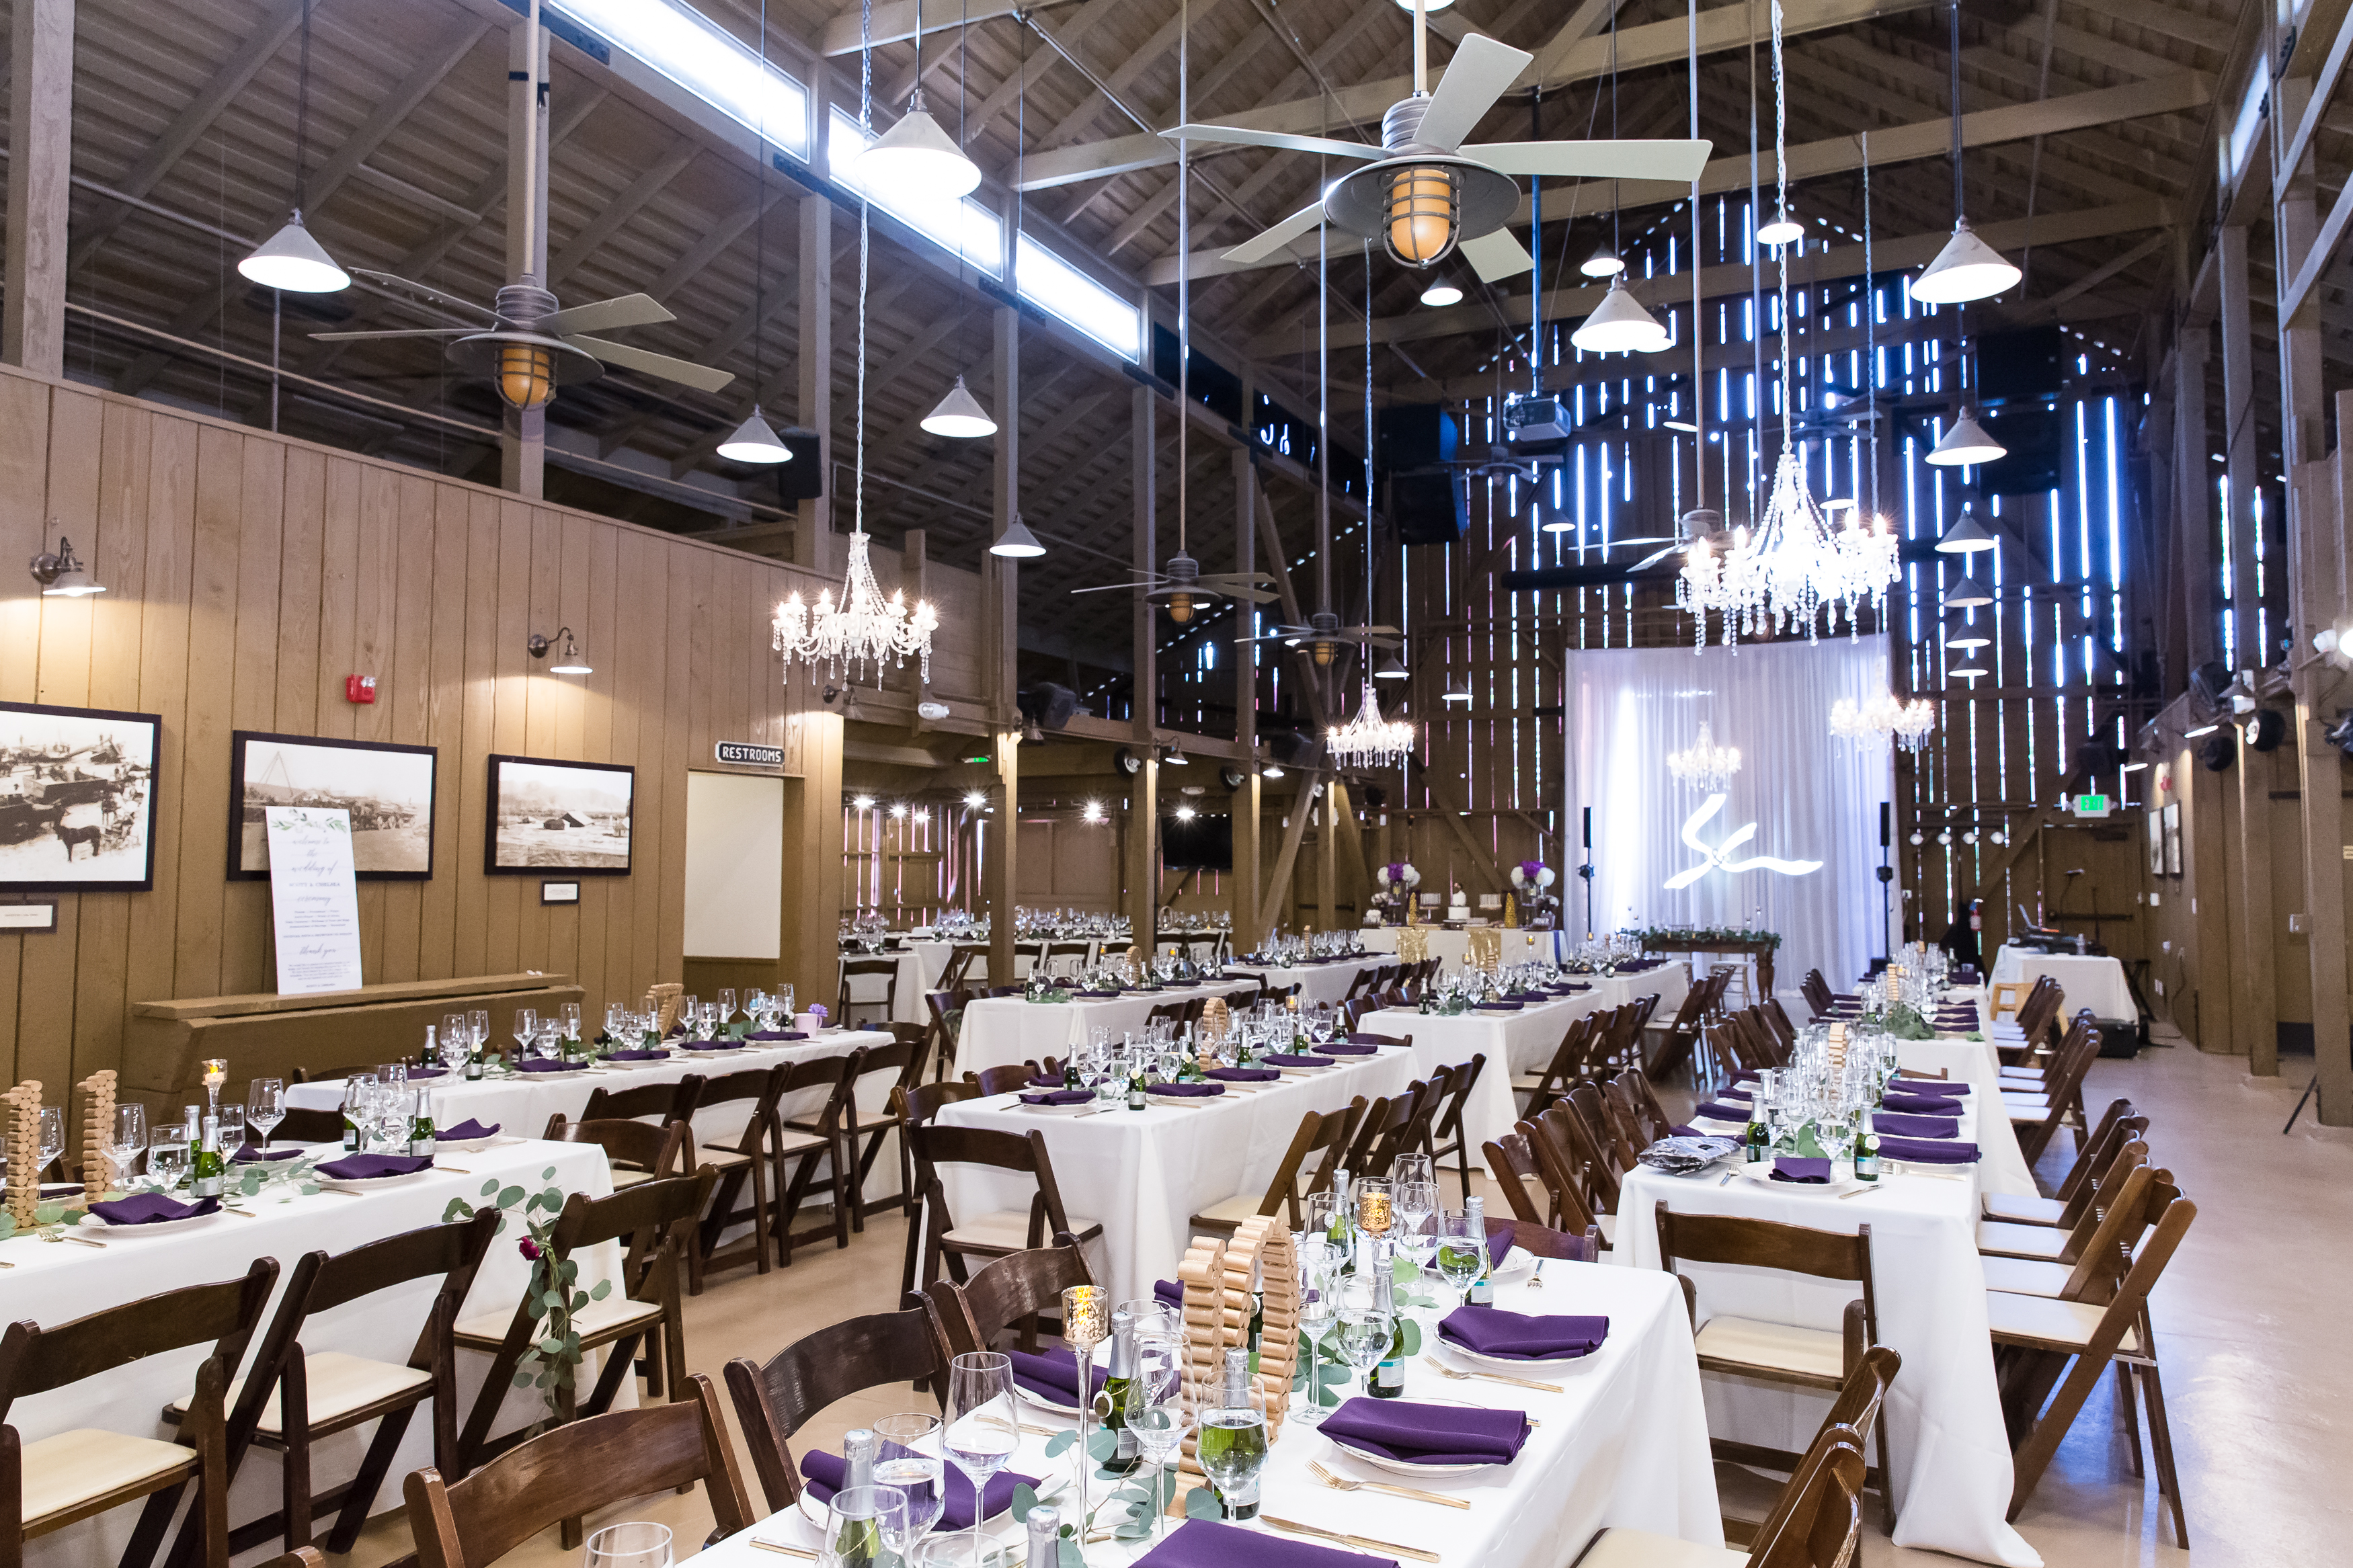 Wedding reception with chandeliers and wooden walls and ceilings